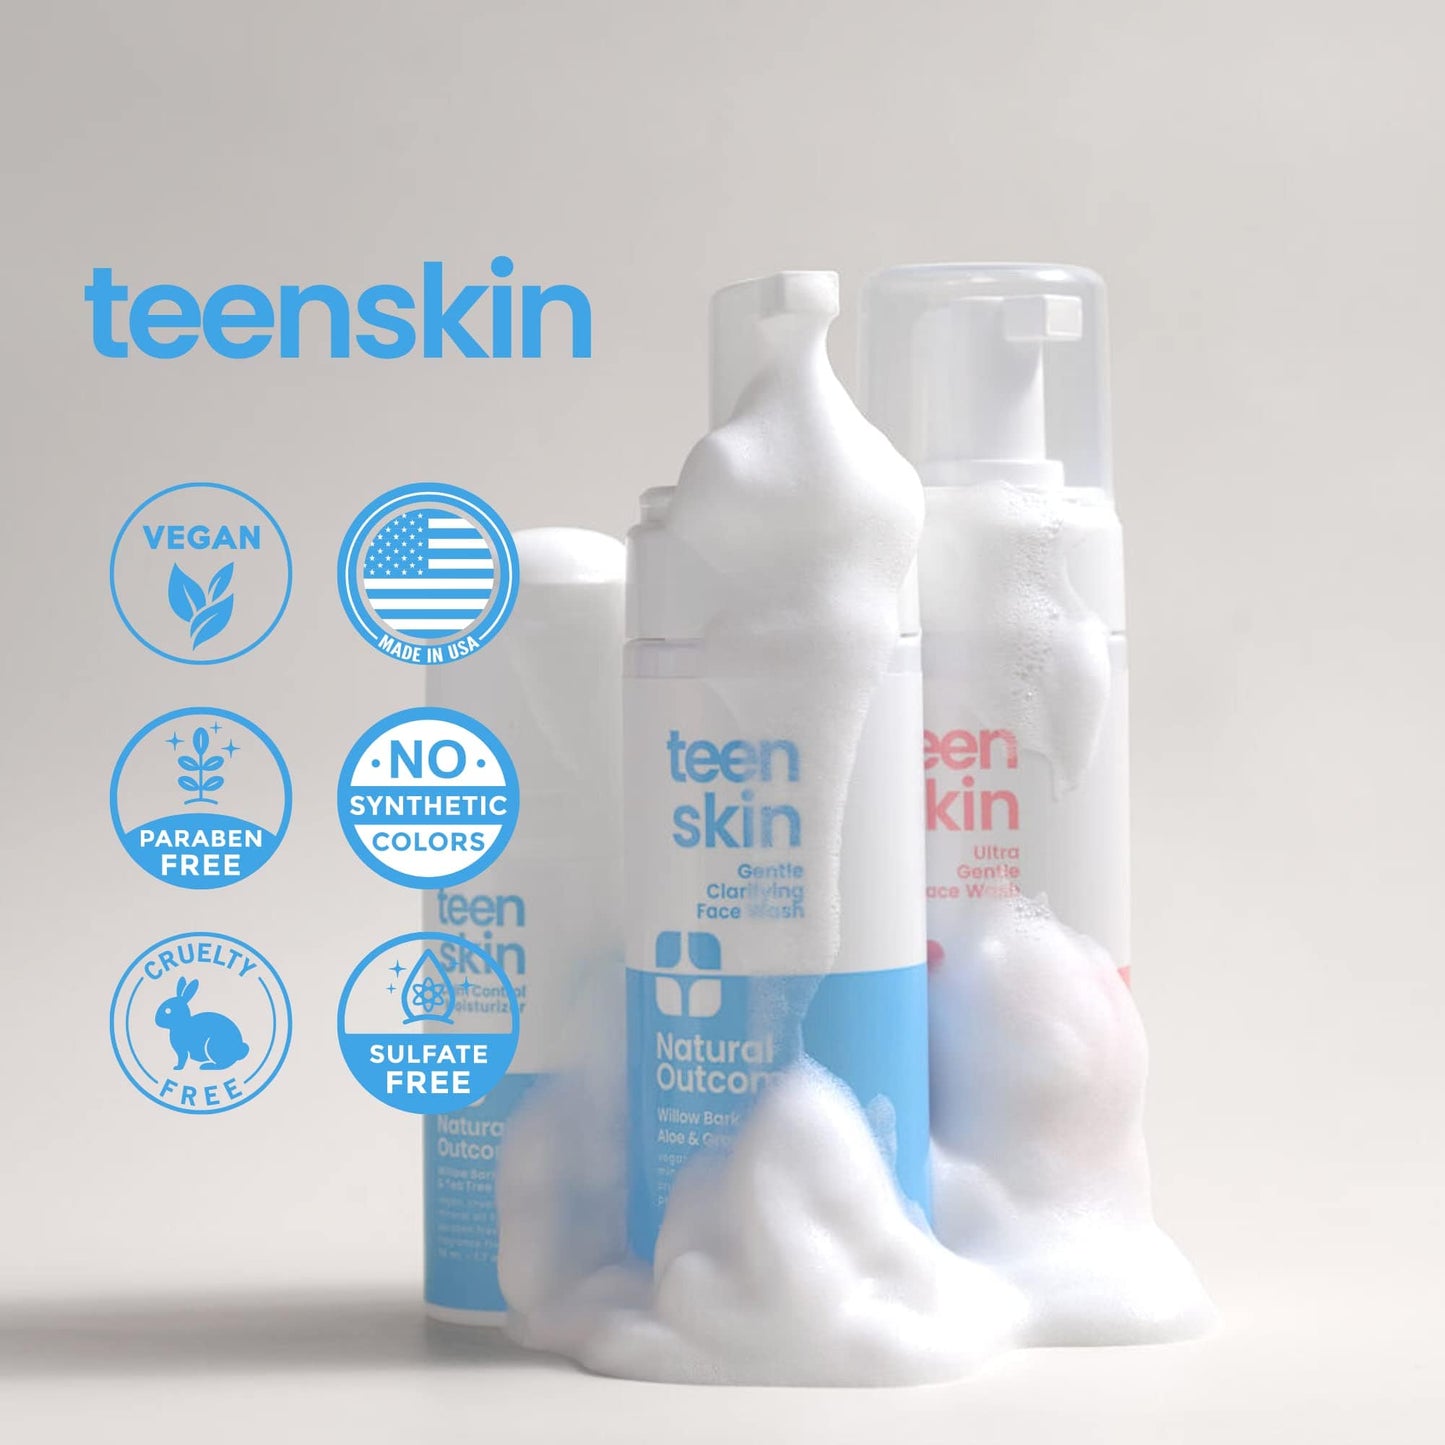 Teen Skin 3-Step Skin Care Kit, Daily Boys & Girls Skin Care Regimen, Face Wash, Toner, & Moisturizer, Perfect for Teens Preteens & Kids Looking to Prevent Acne